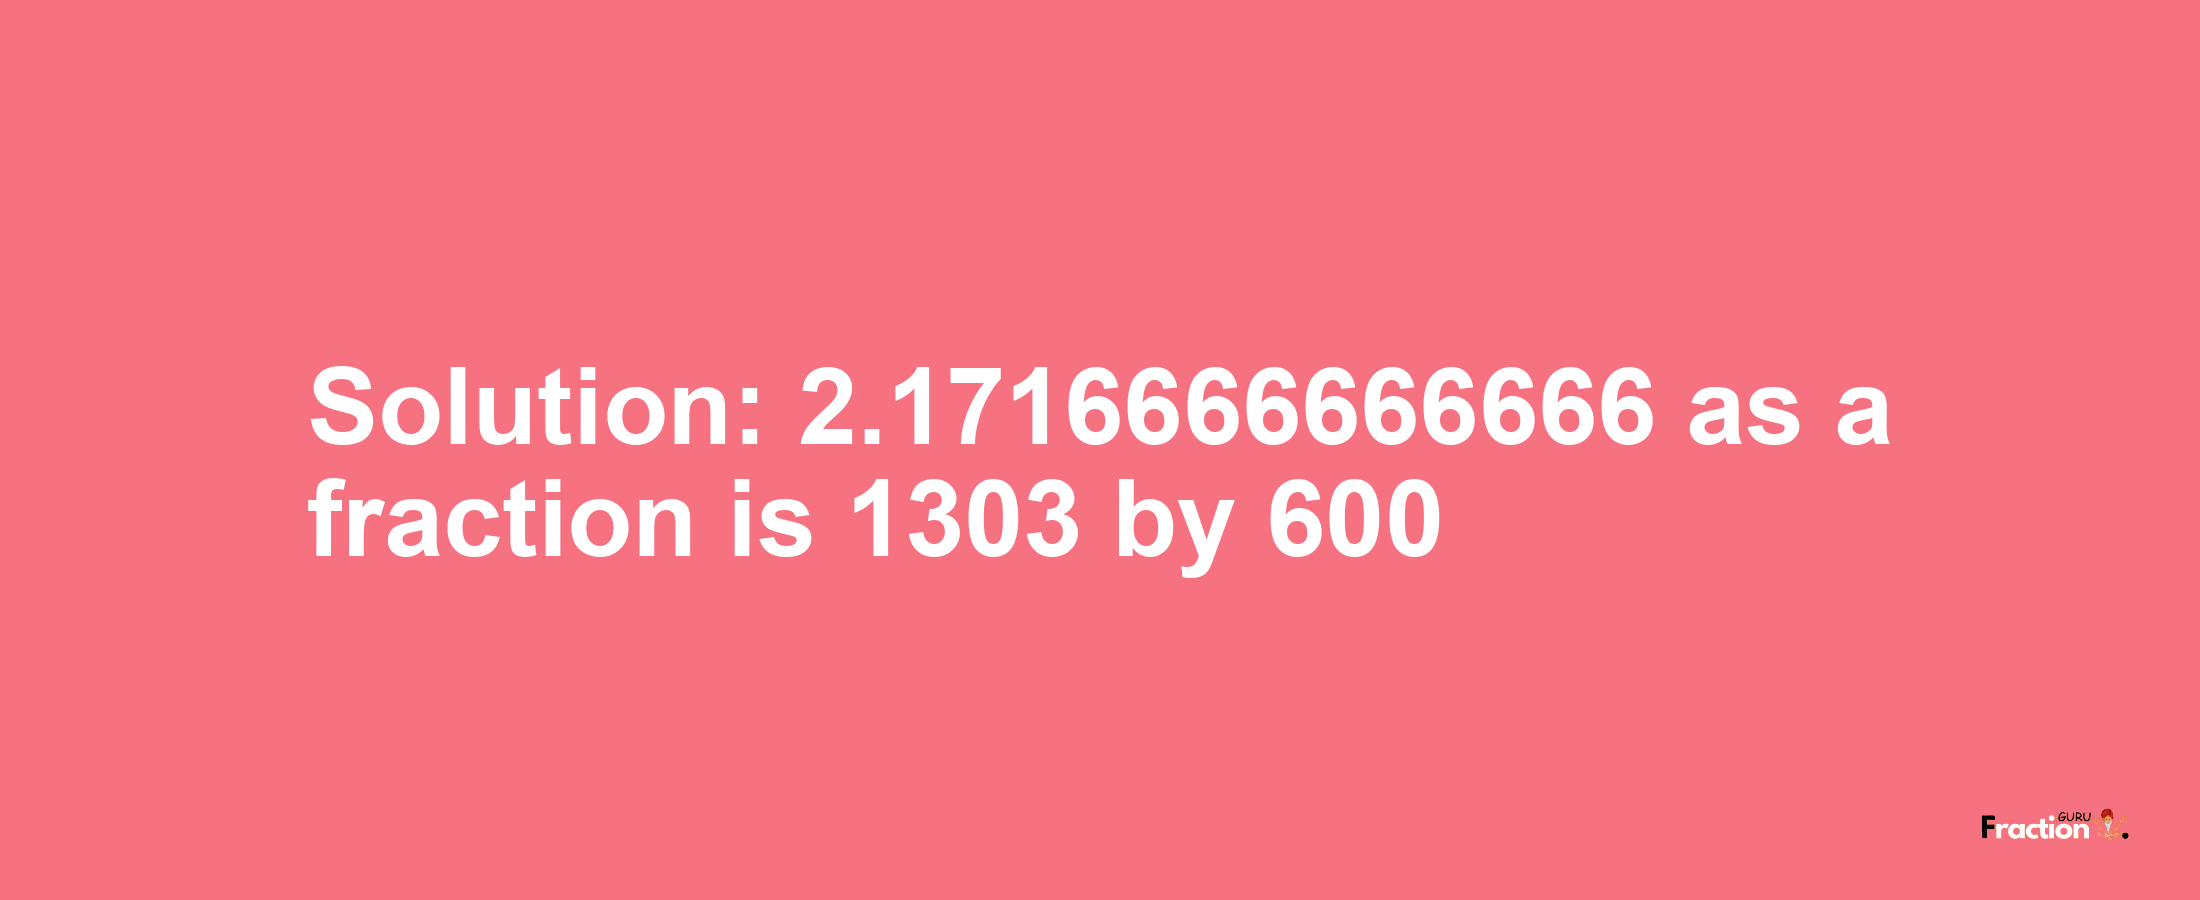 Solution:2.1716666666666 as a fraction is 1303/600